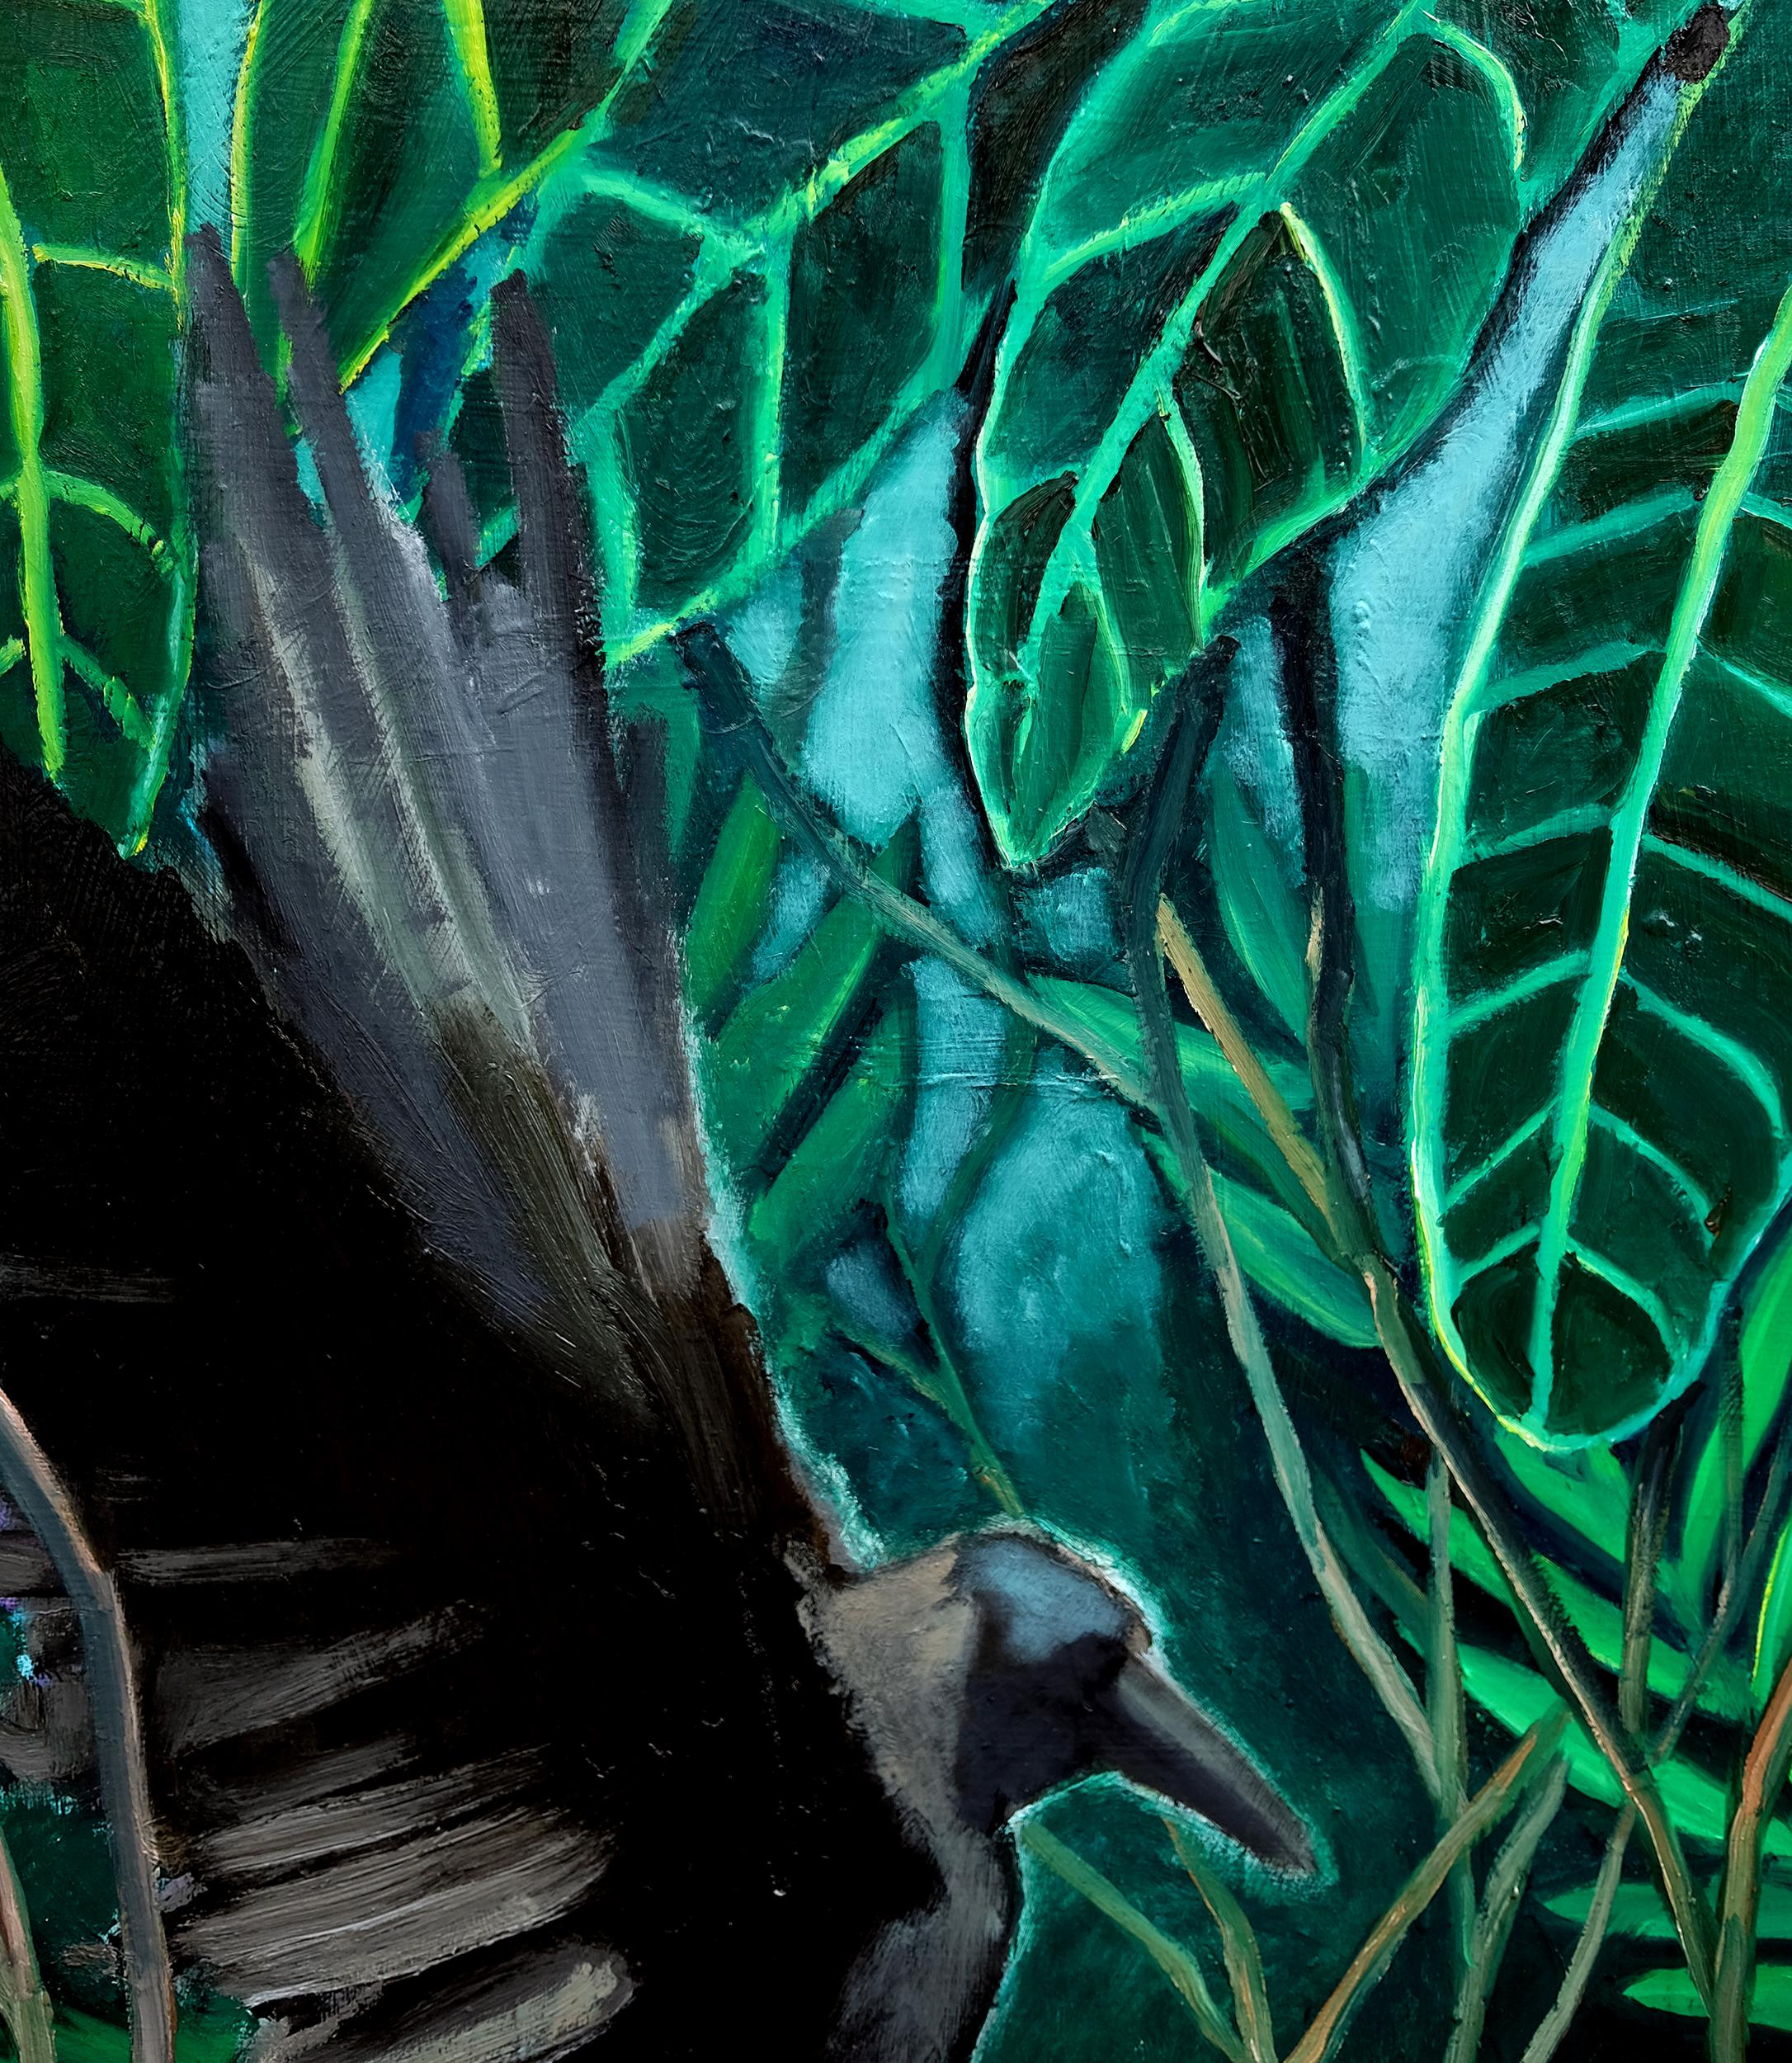 <p>Artist Comments<br />An expressionist view of a raven among dense green foliage. Artist Scott Dykema says he intentionally left the painting ambiguous as to whether the bird is landing to rest or stretching its wings into flight. The surrounding